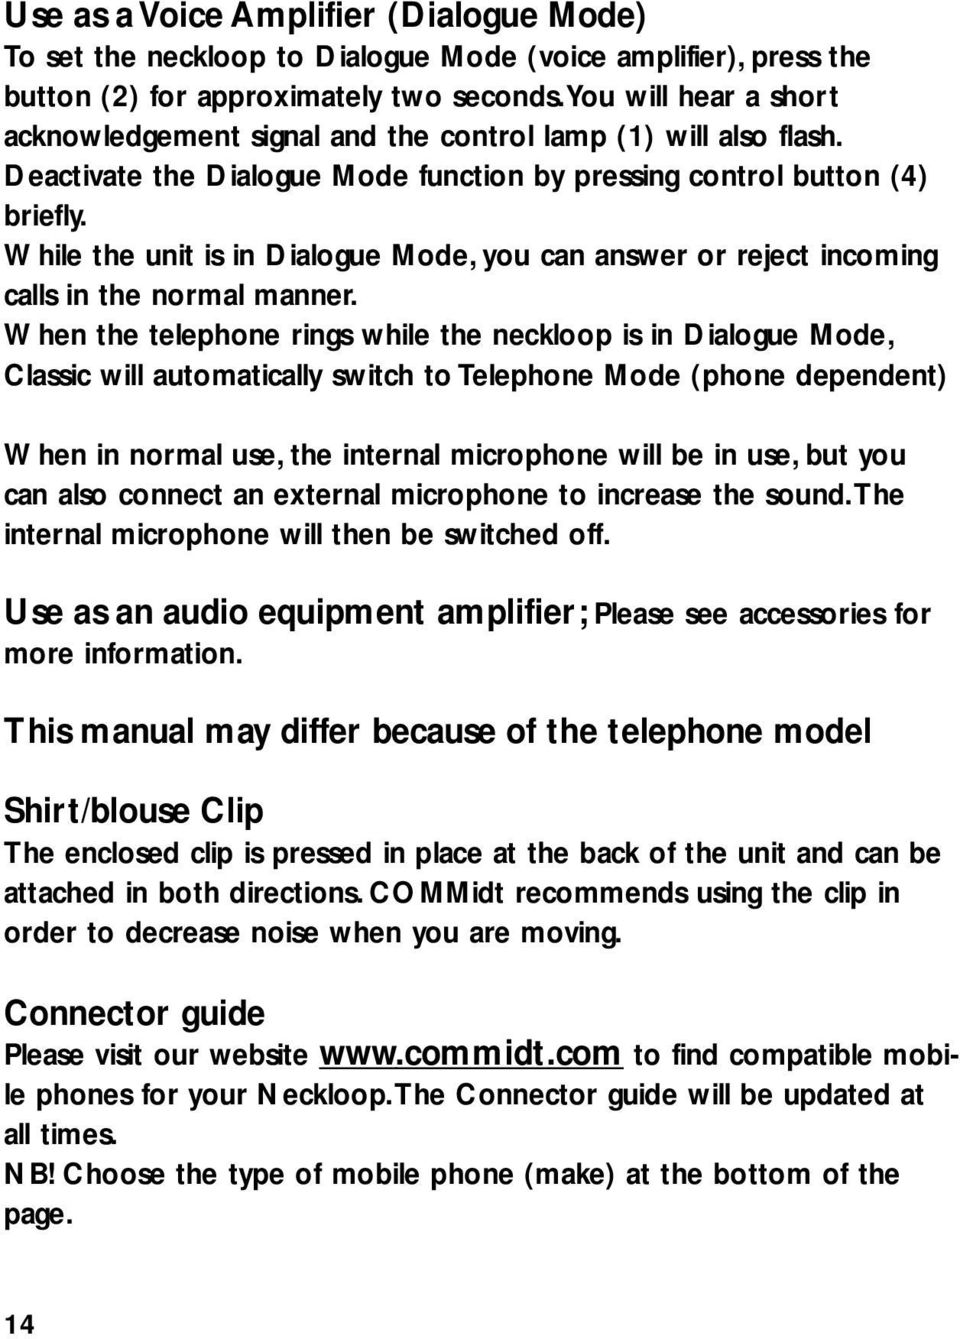 While the unit is in Dialogue Mode, you can answer or reject incoming calls in the normal manner.